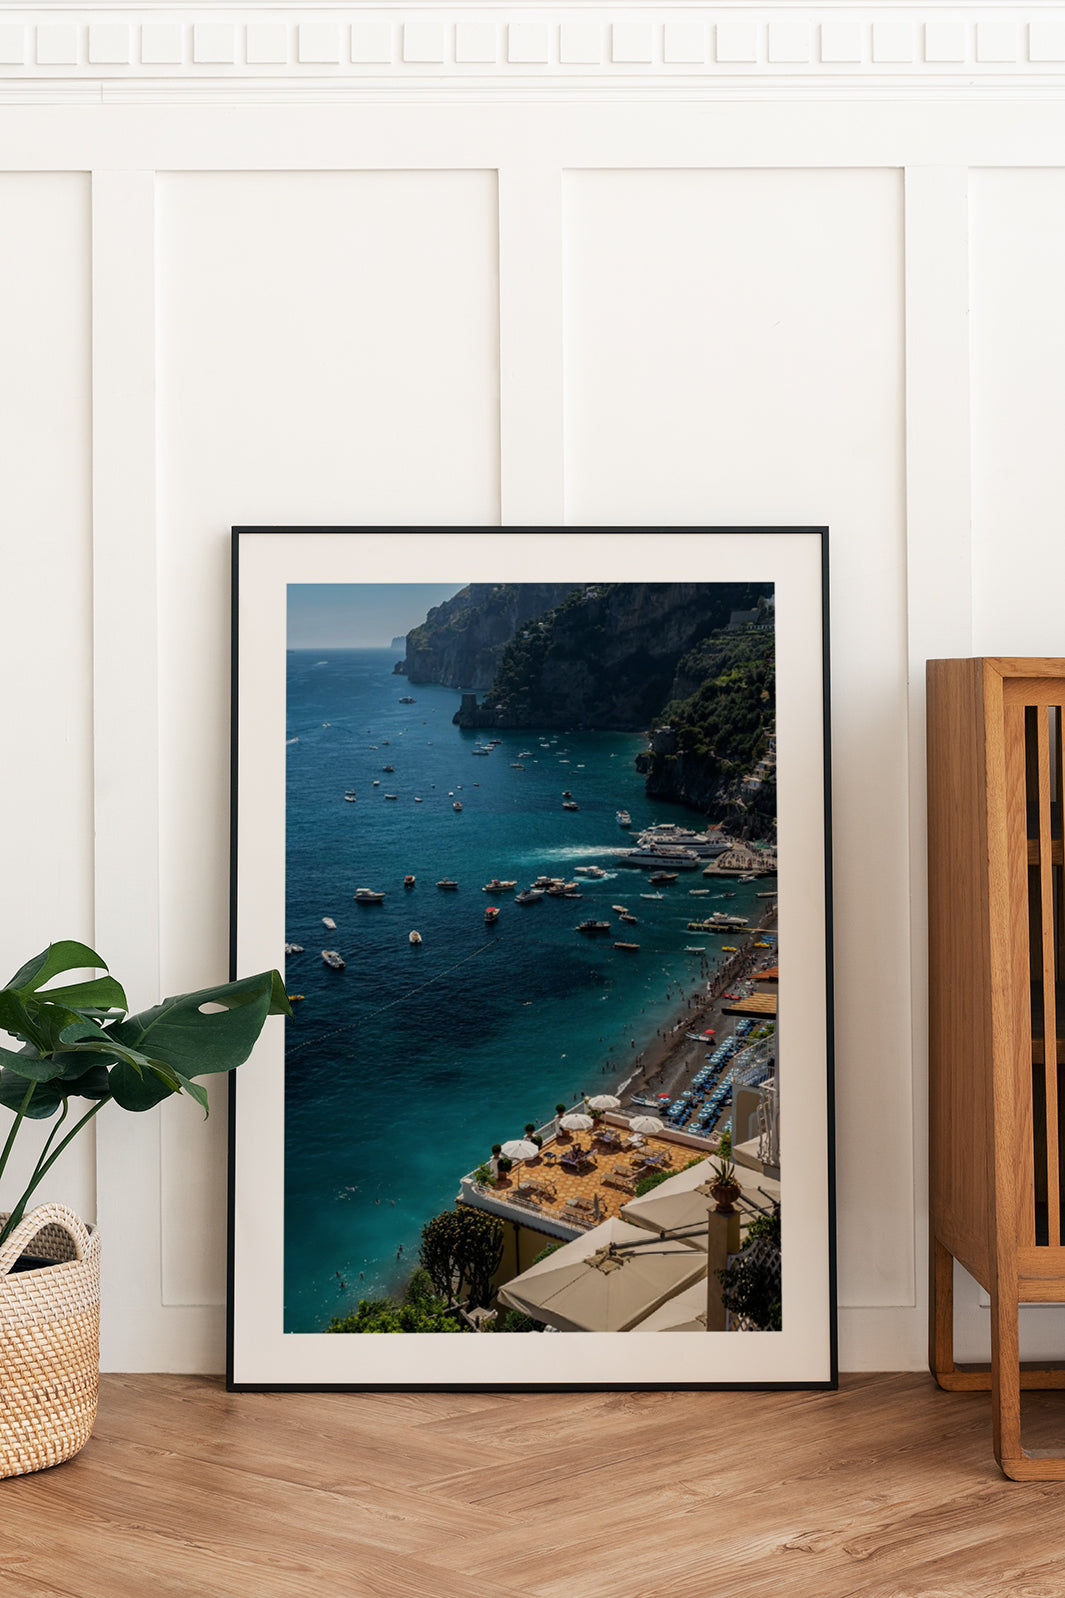 How to choose the right poster size & frame